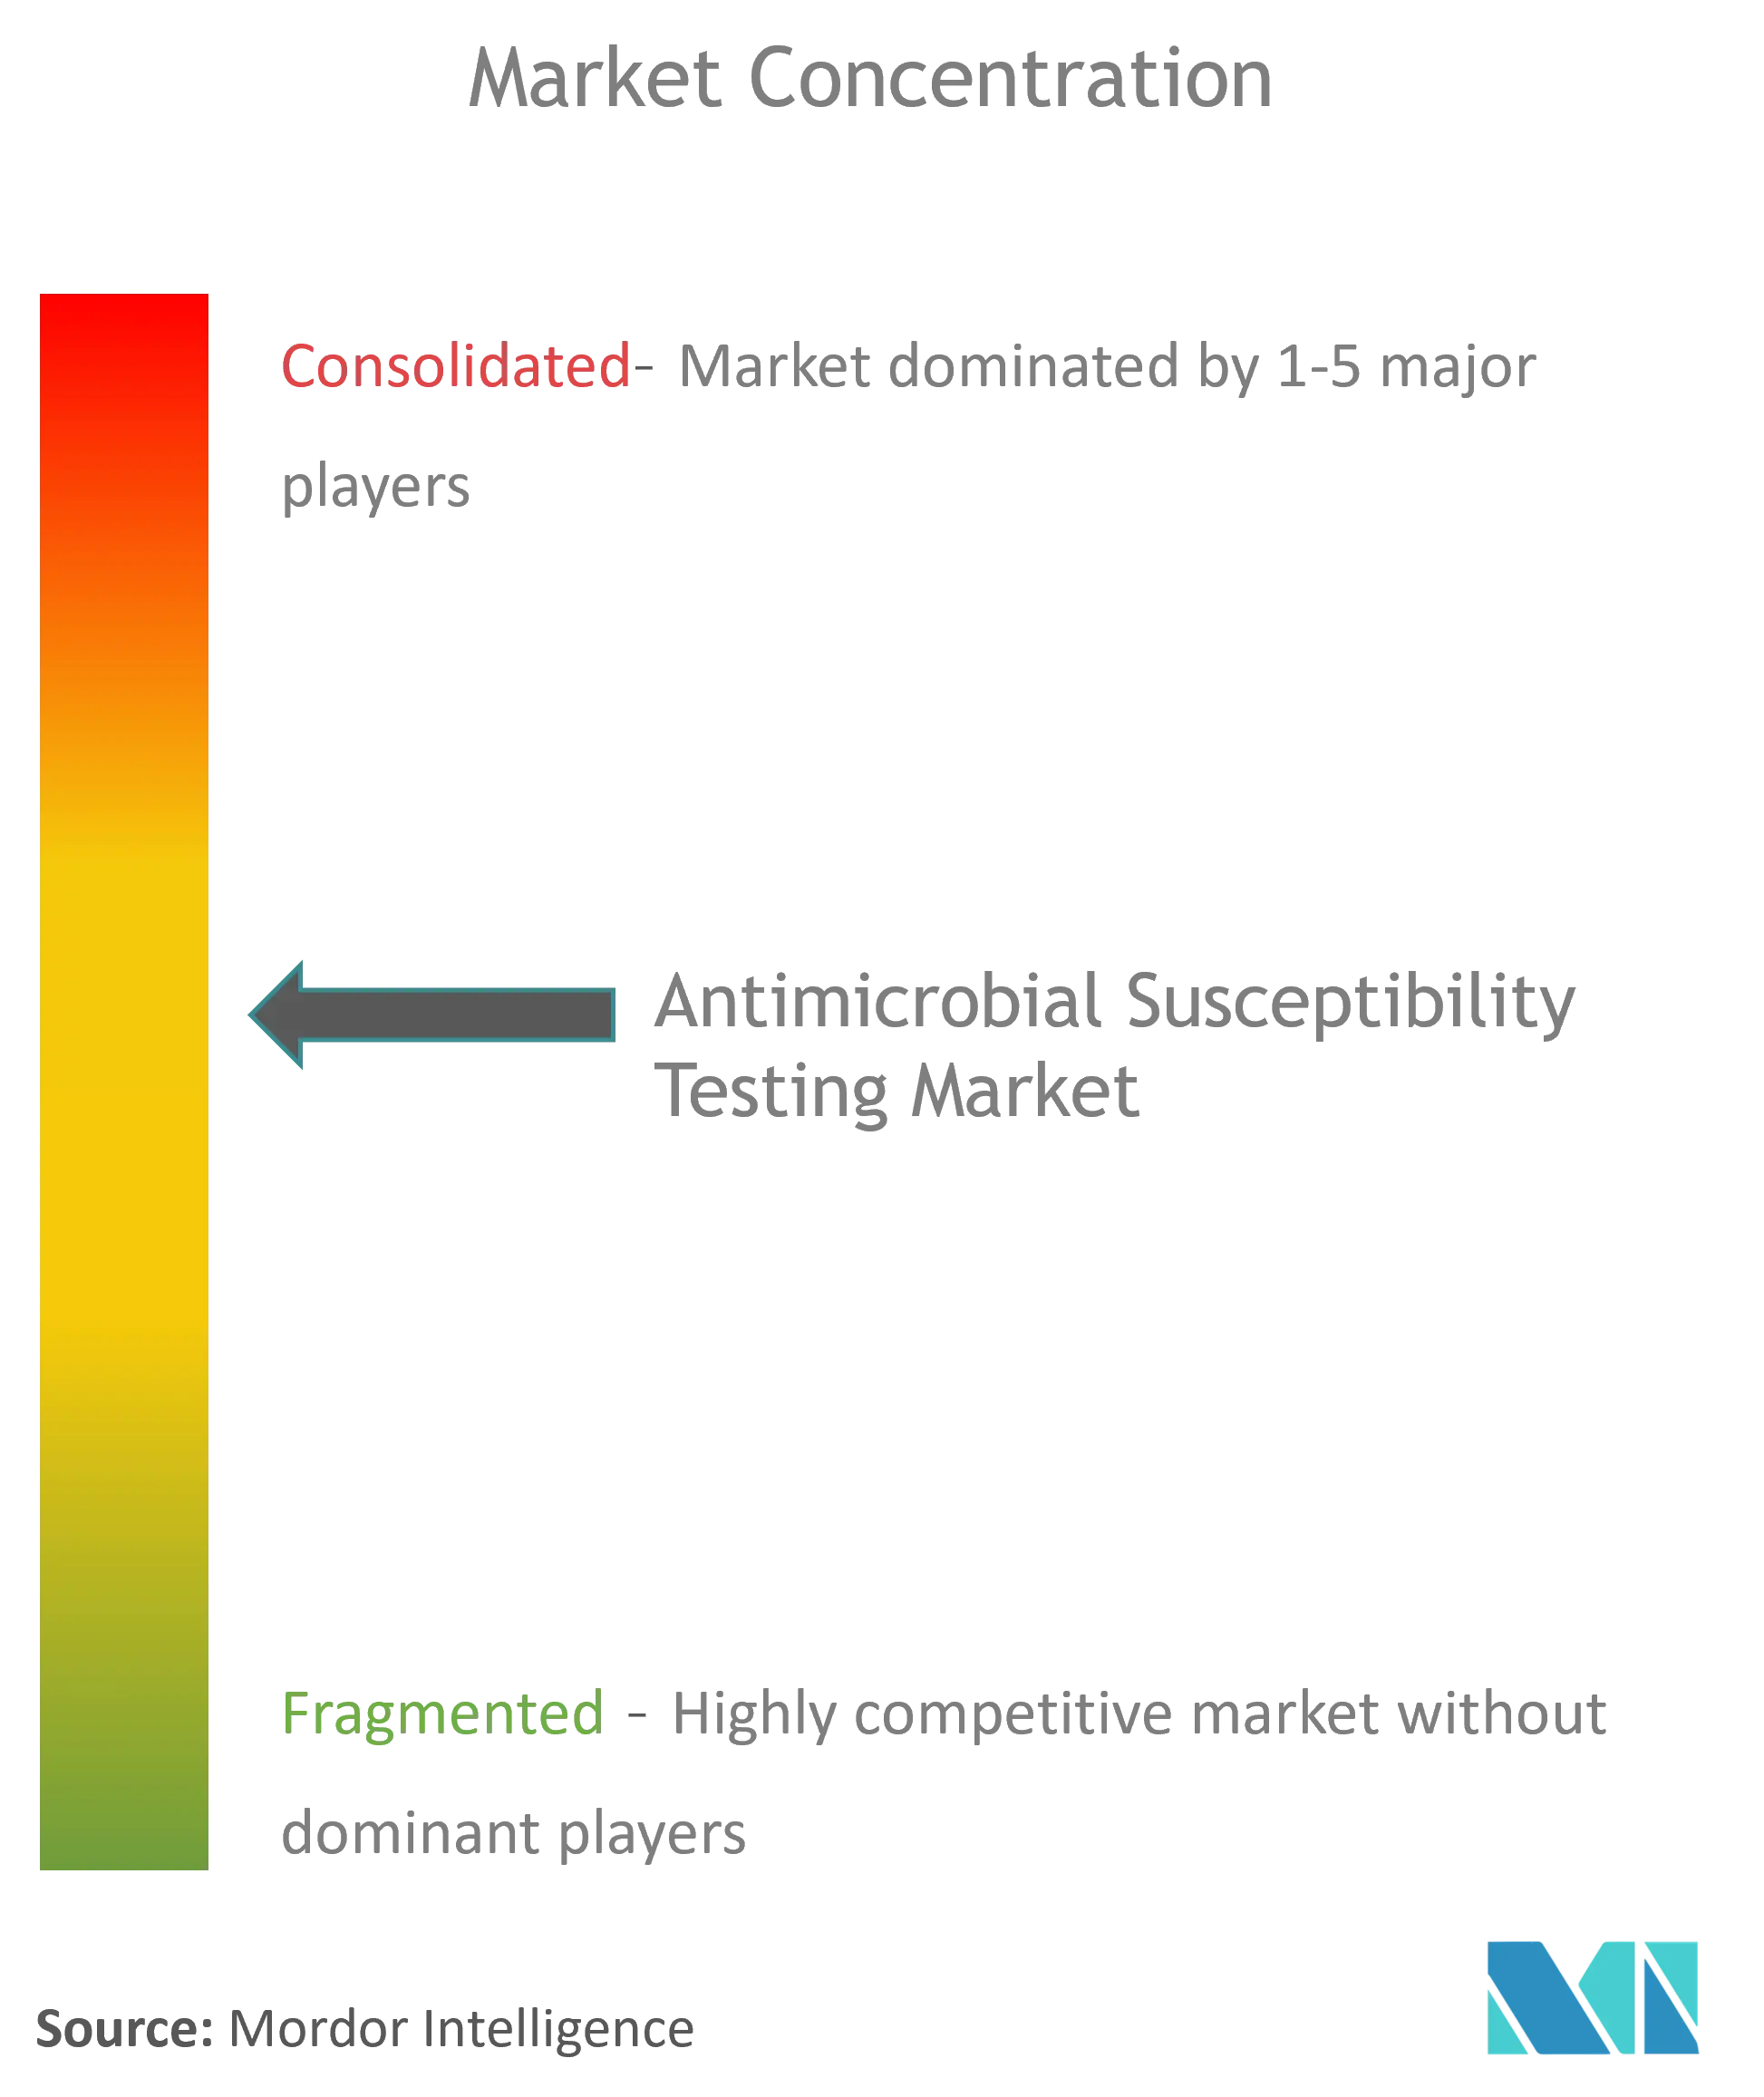 Antimicrobial Susceptibility Testing Market Concentration